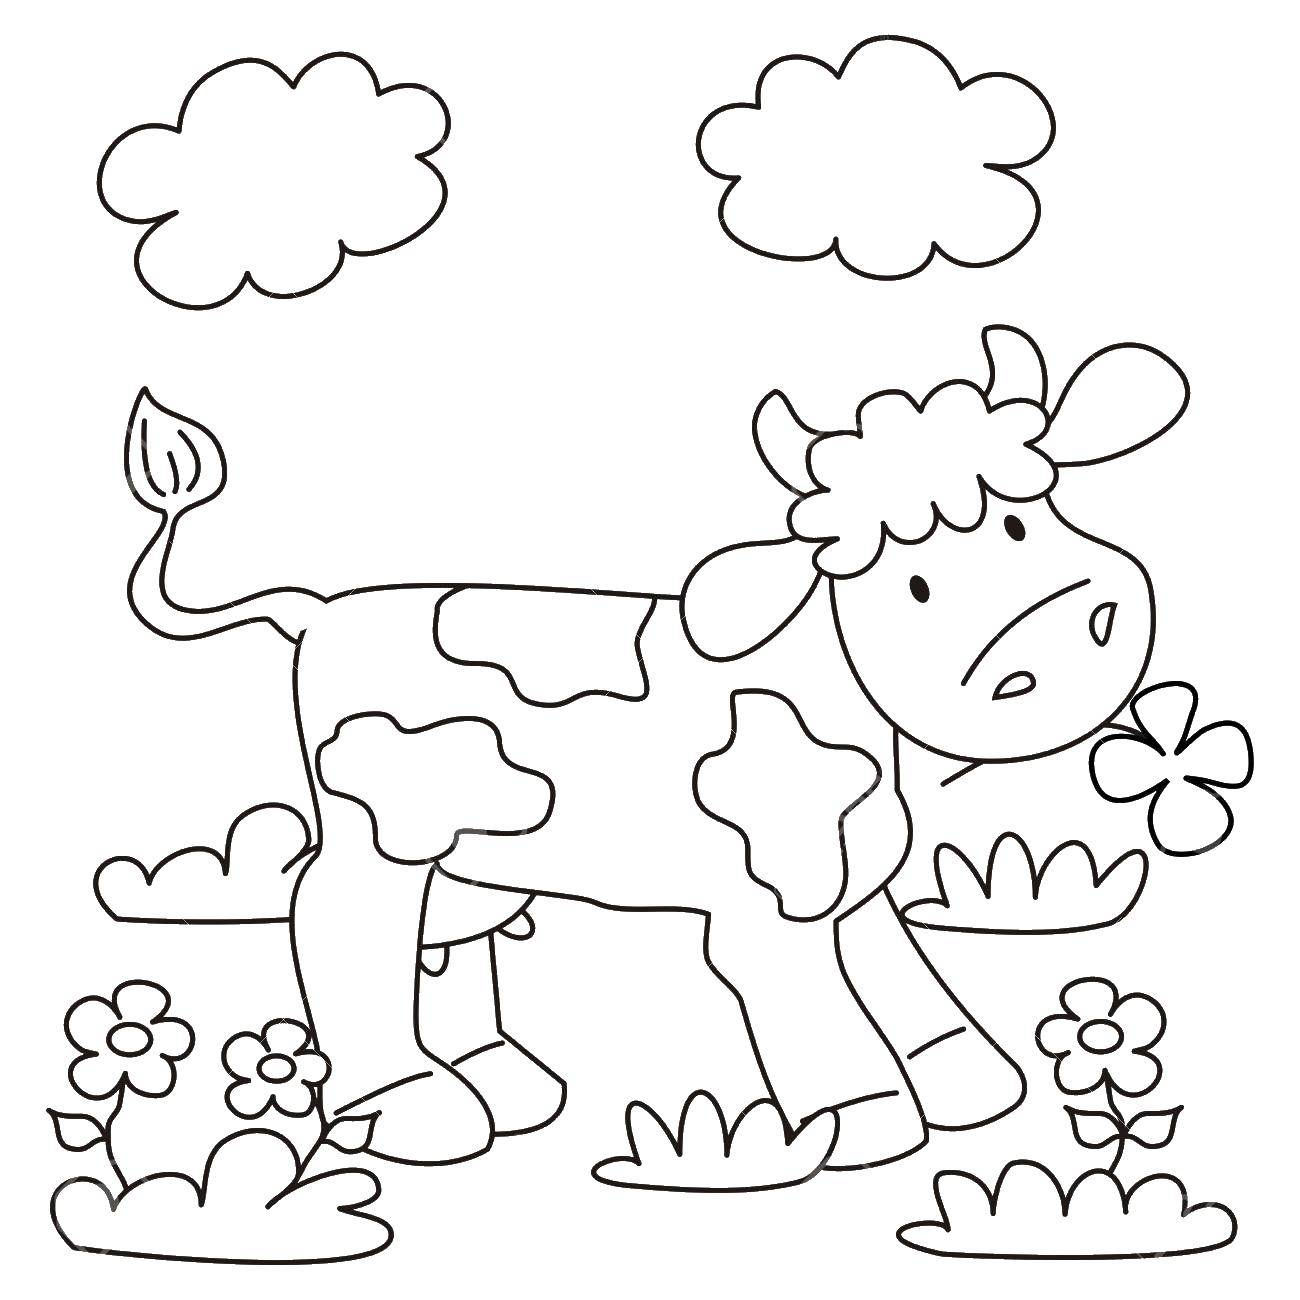 Coloring Spotted cow. Category Pets allowed. Tags:  Animals, cow.